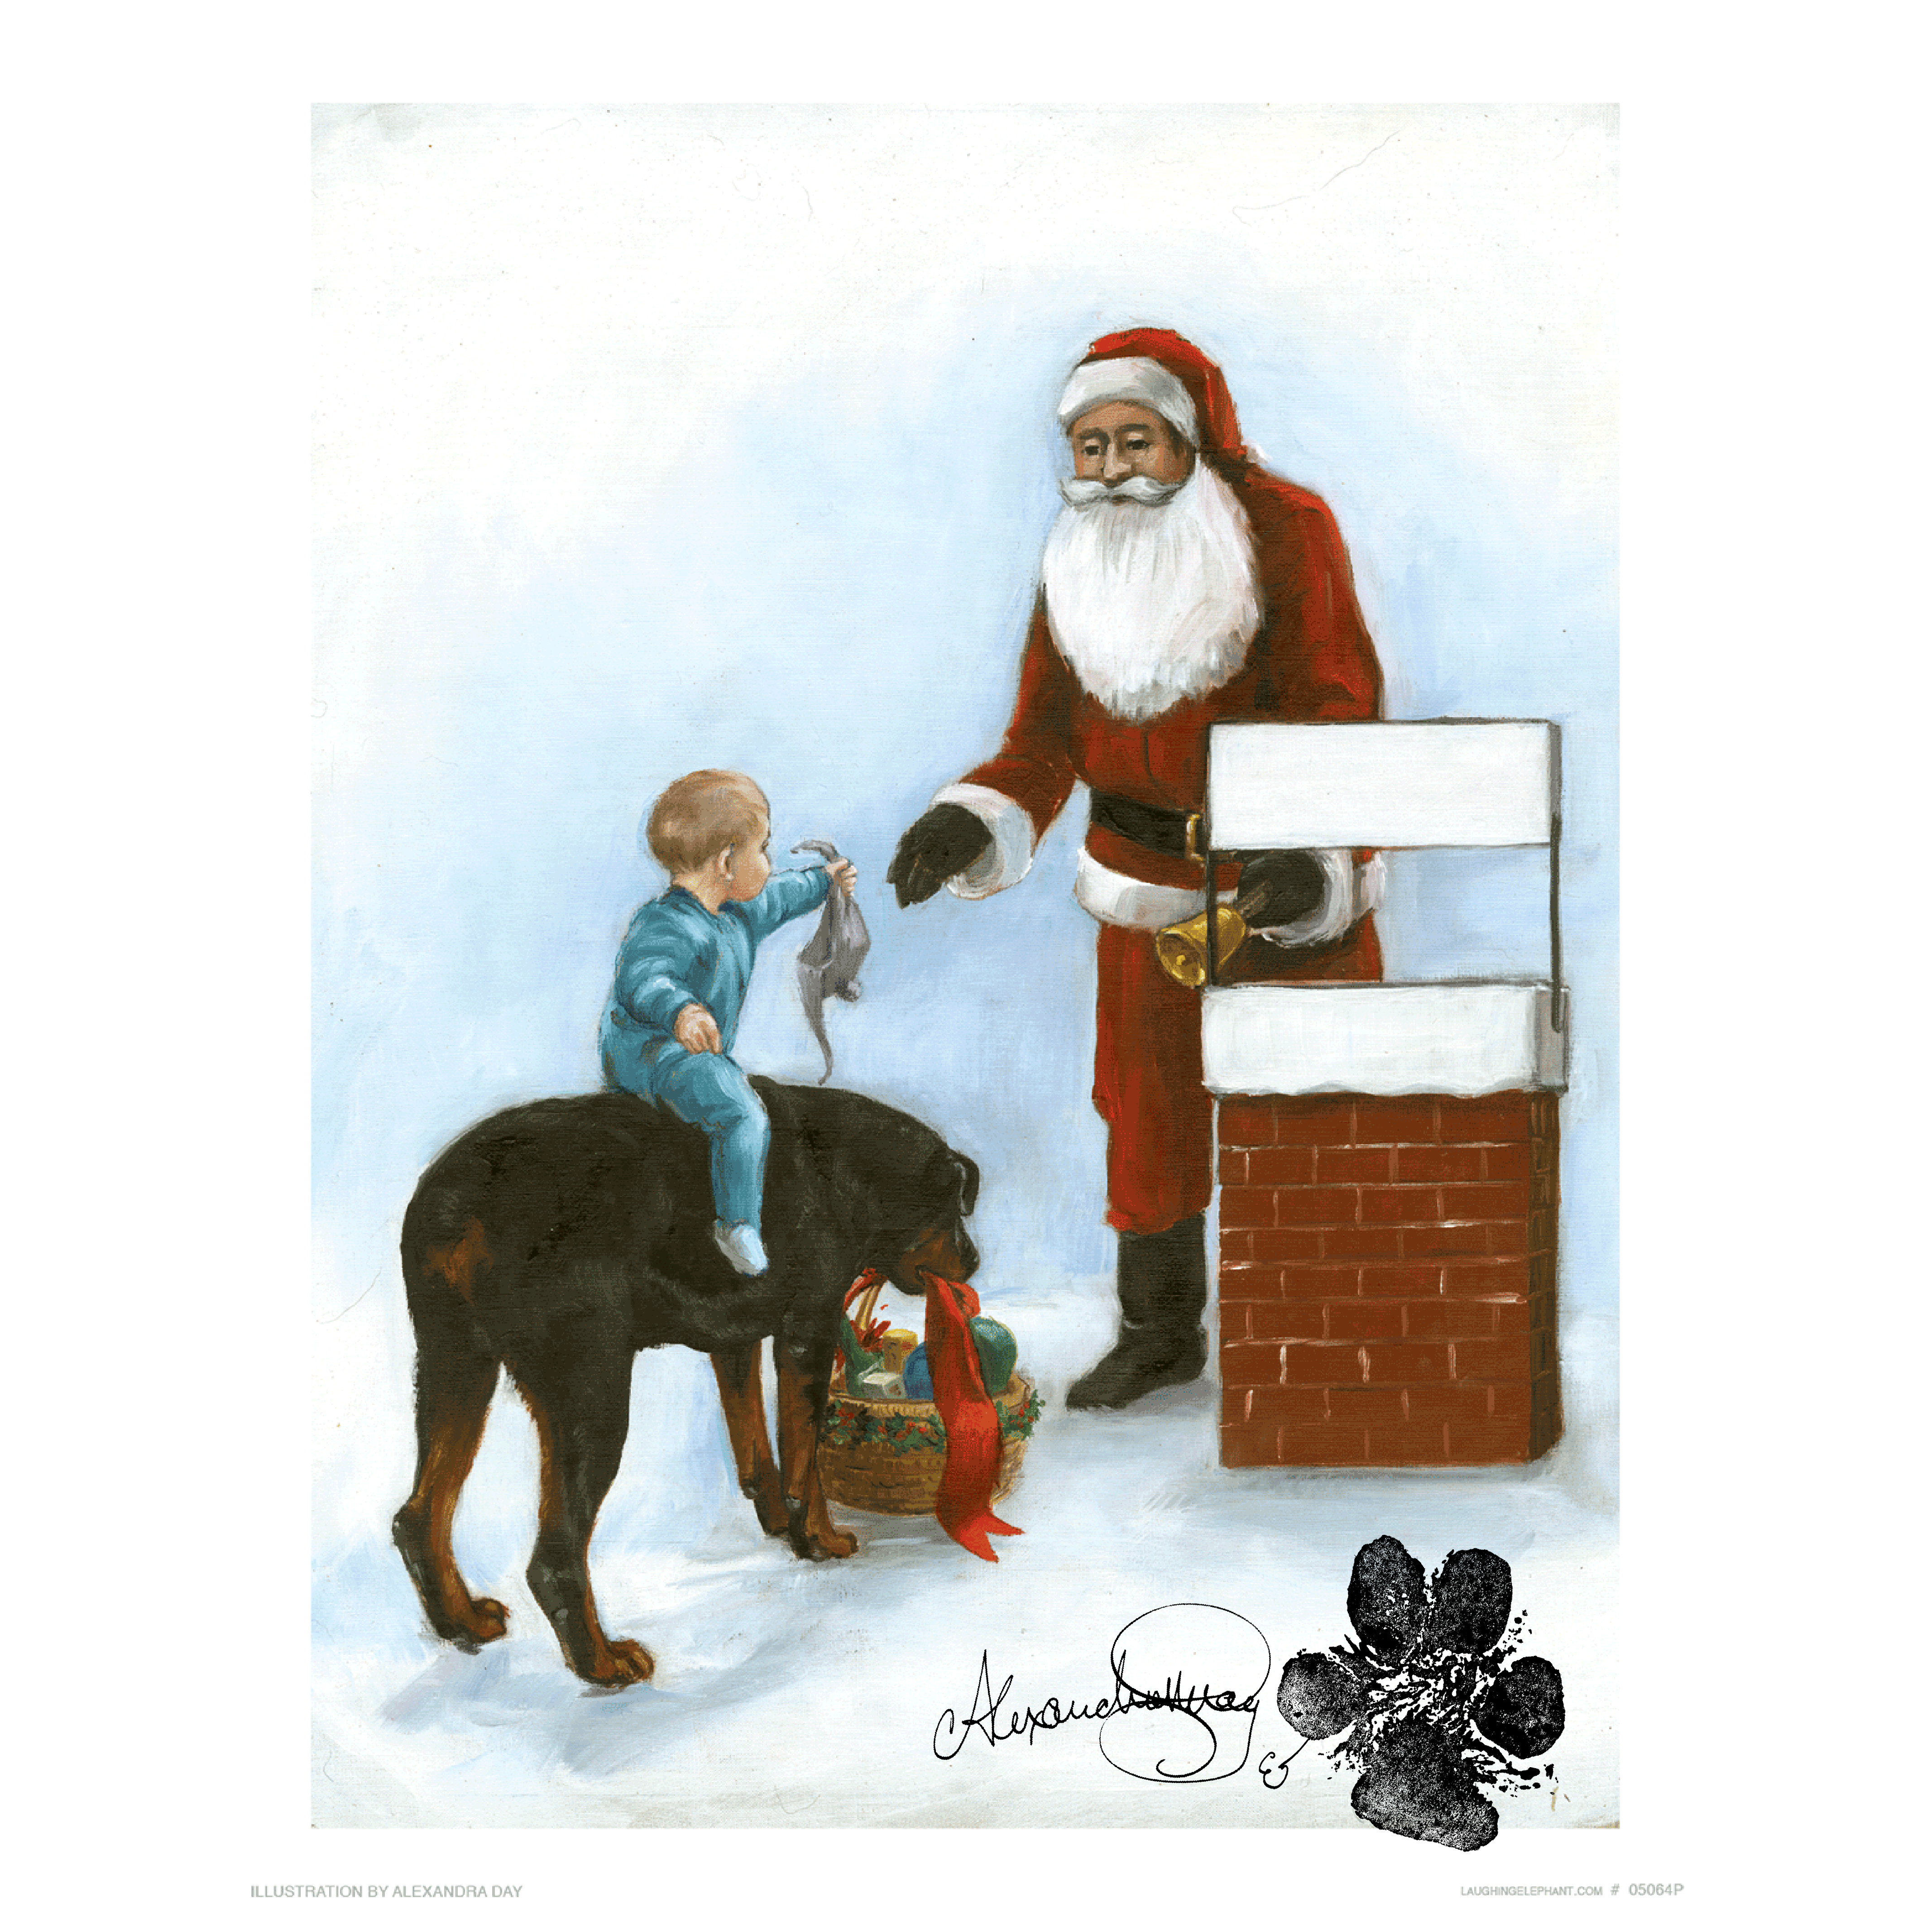 A Christmas Present for Carl - Good Dog, Carl Art Print (Signed) – Laughing  Elephant Wholesale